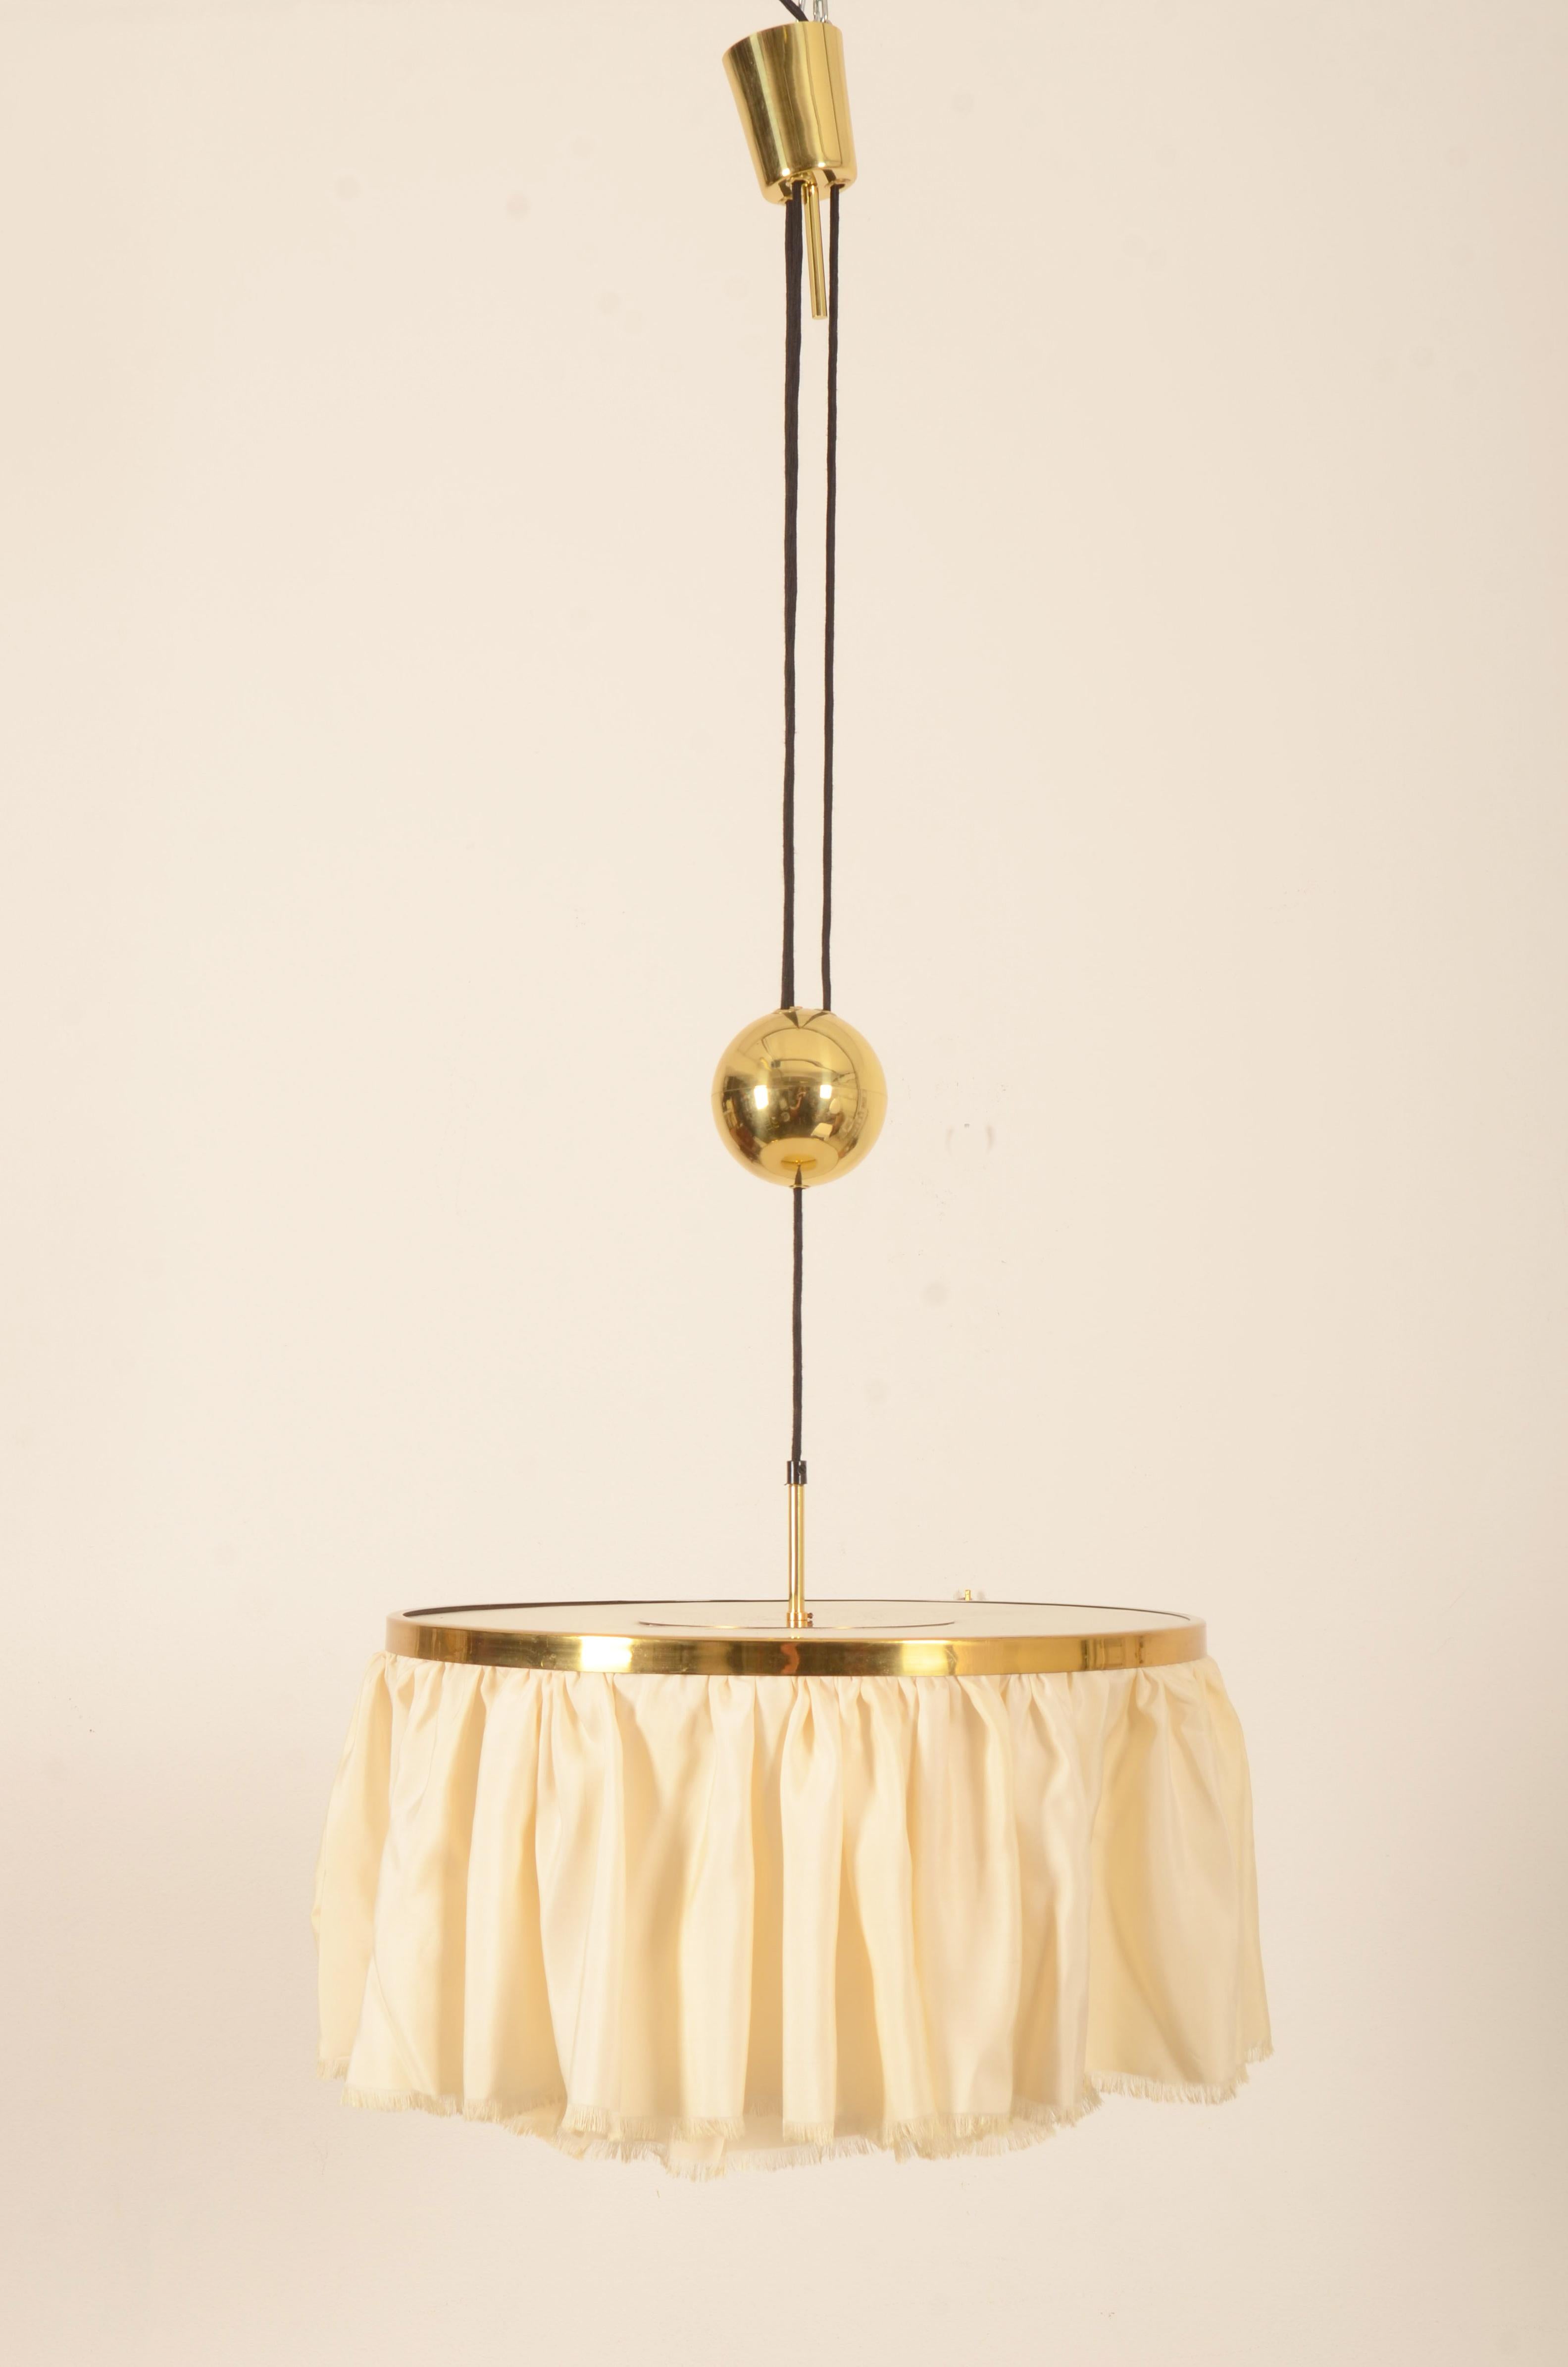 Vienna Secession Counterweight Silk Pendant Light by J.T. Kalmar Designed by Adolf Loos For Sale